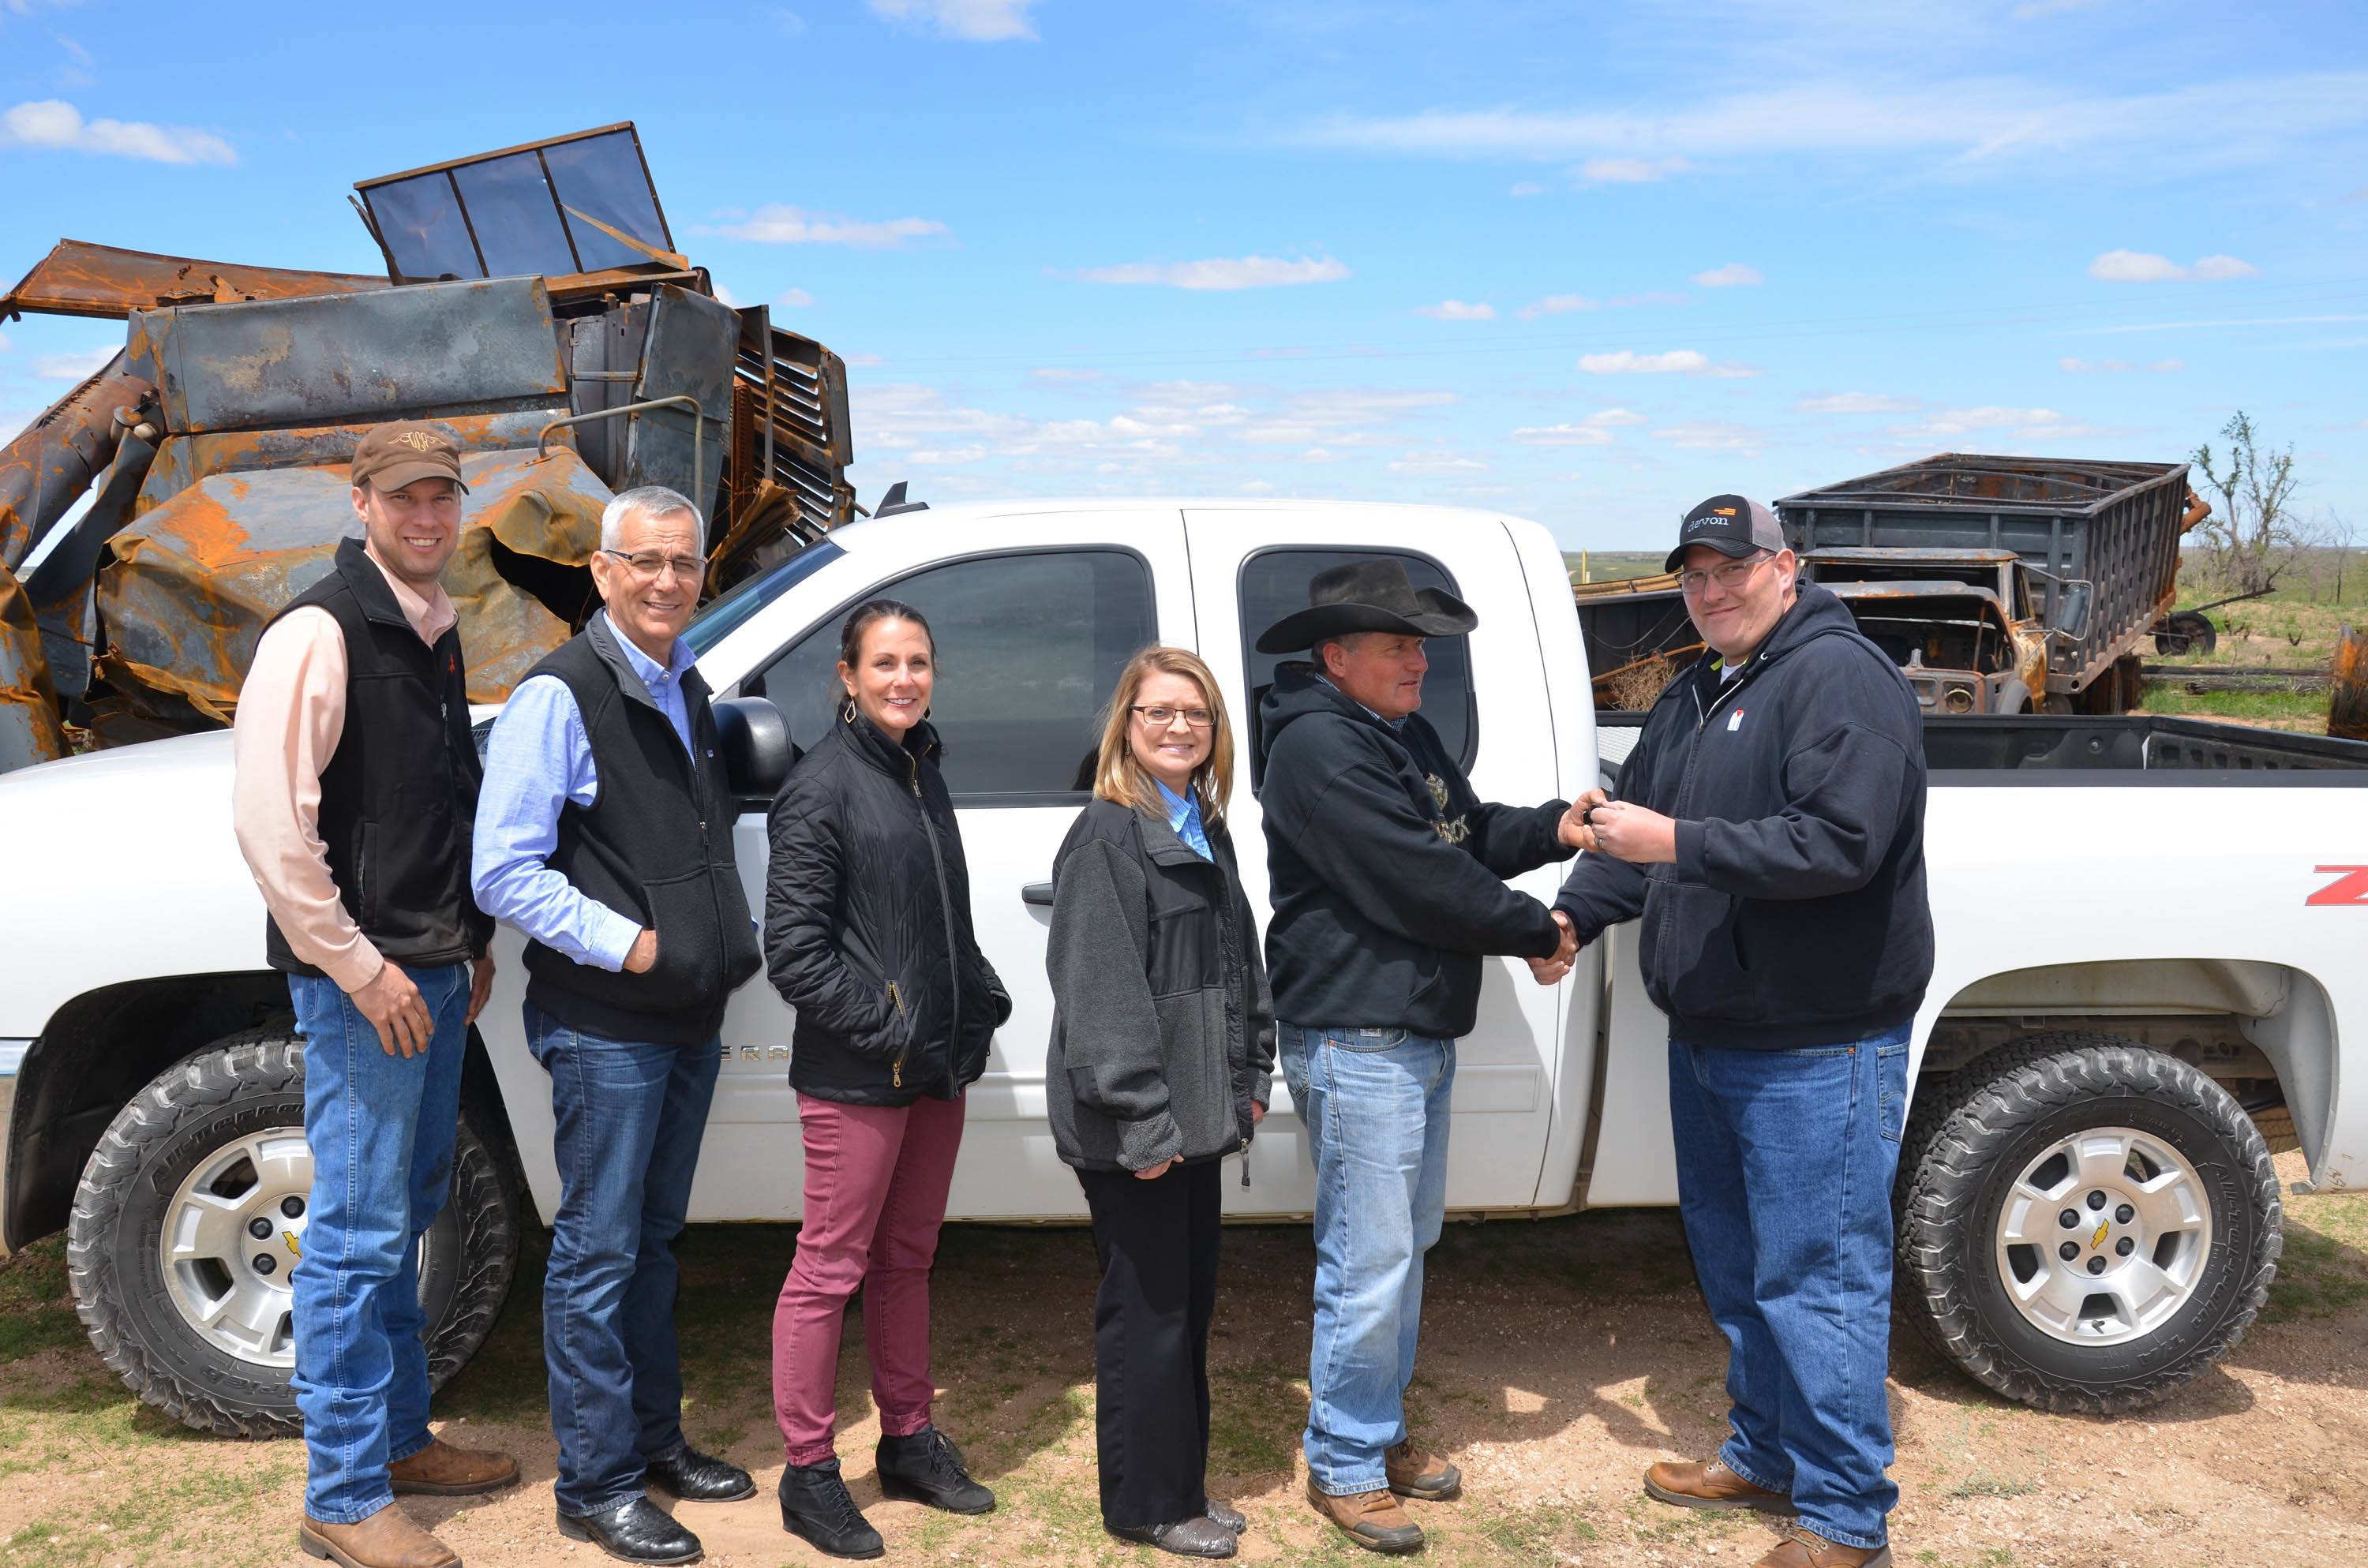 Devon Energy Presents Ranching Families Affected by Recent Wildfires with Pickup Trucks